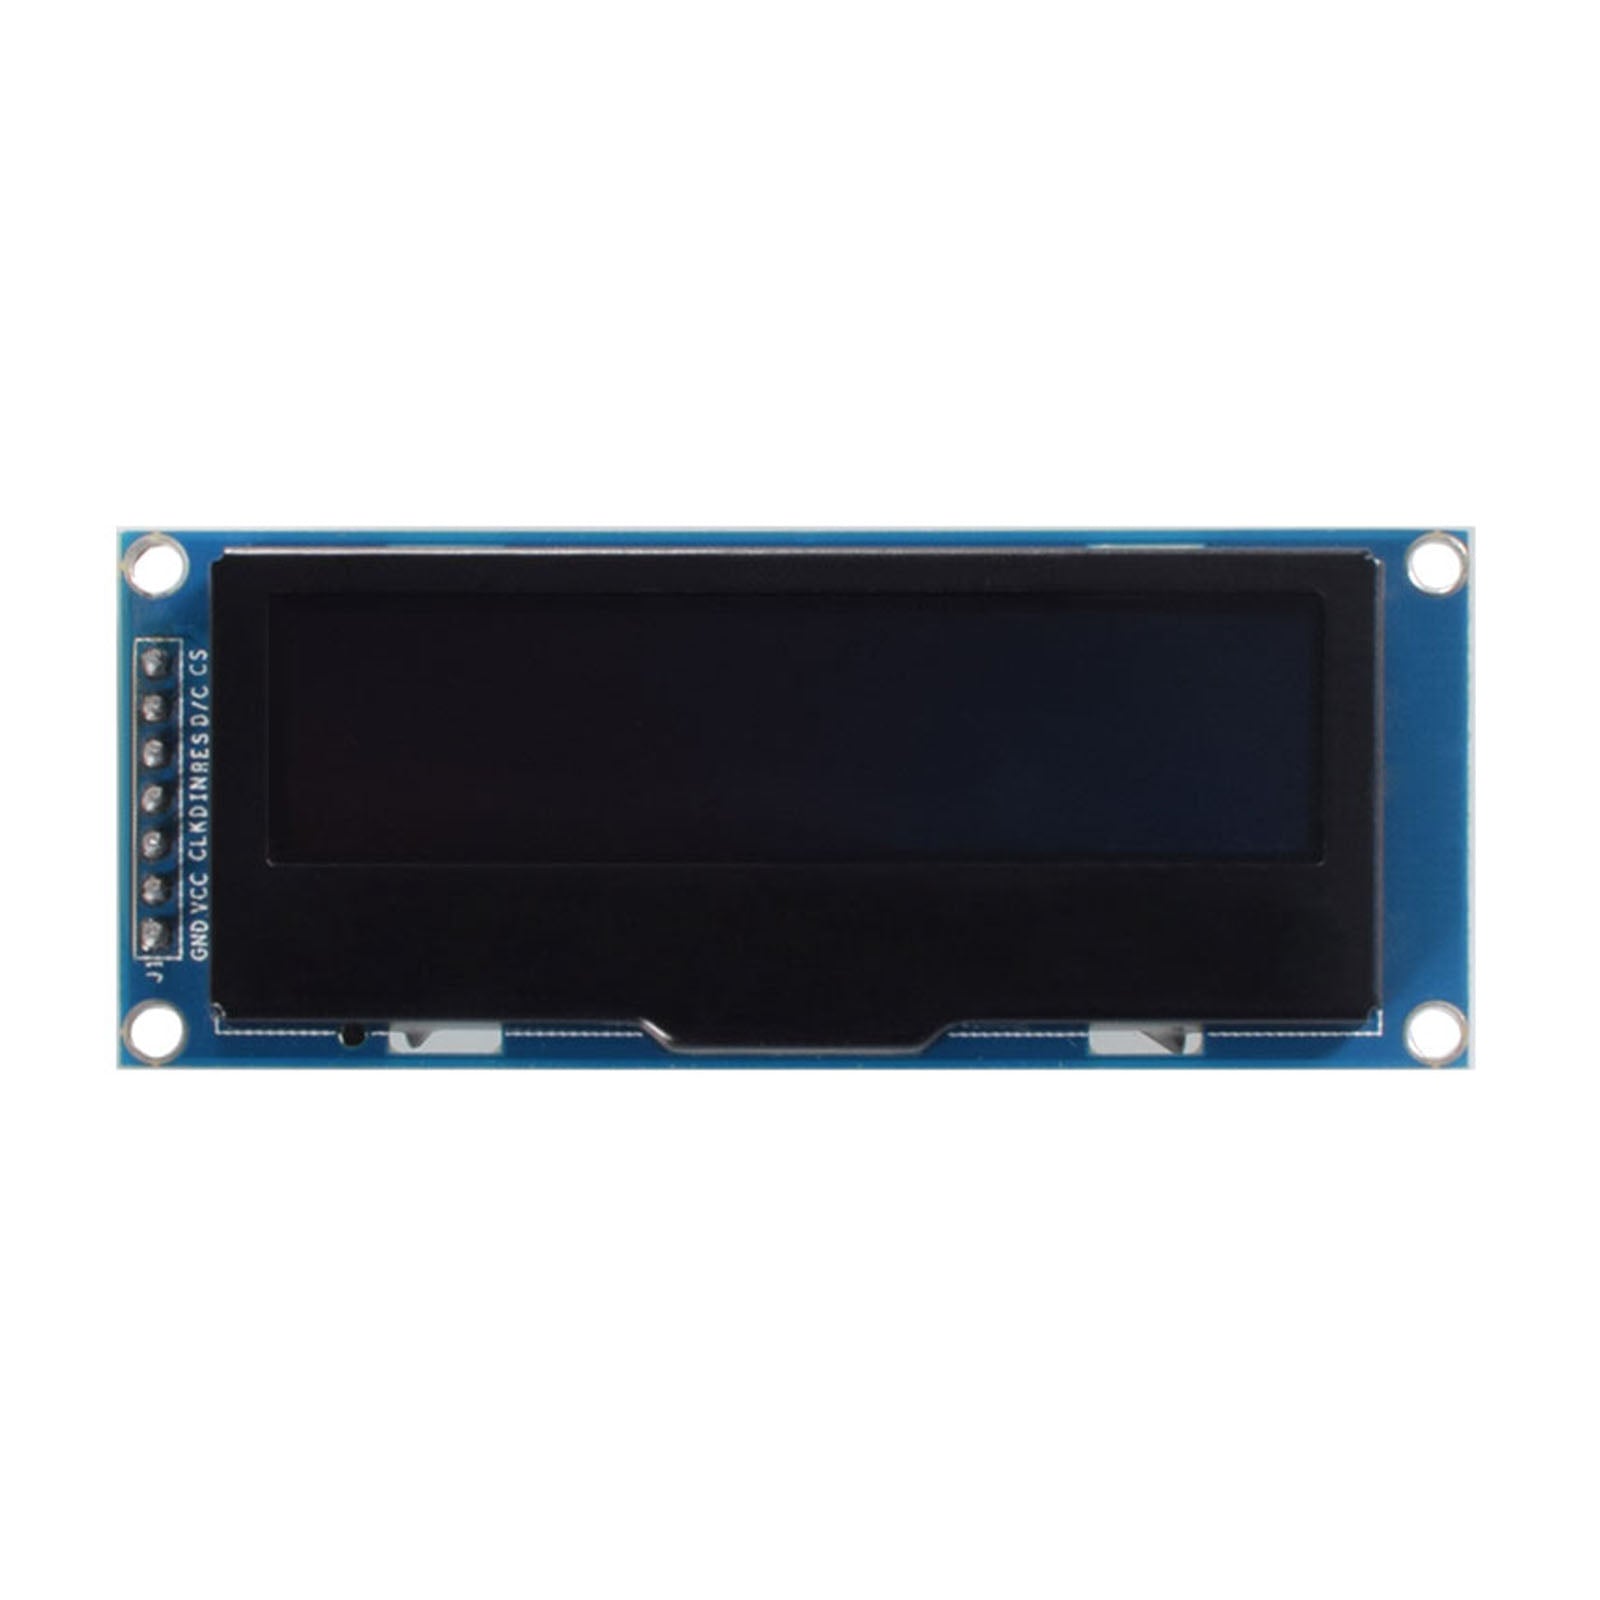 128x32 monochrome OLED graphic display module with SPI interface